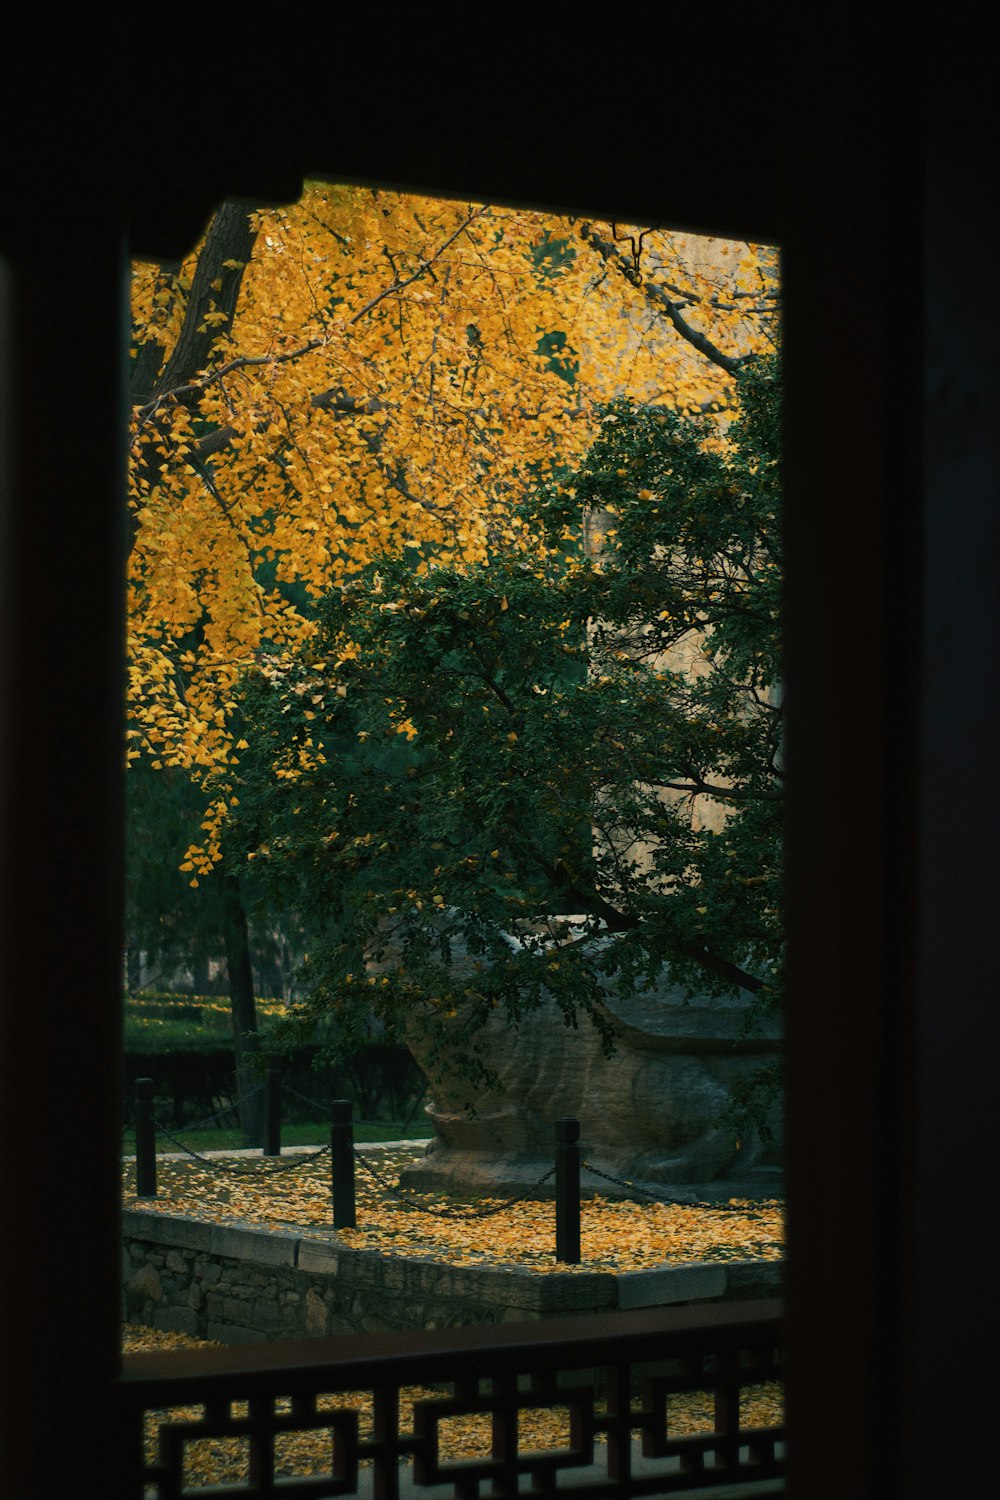 a tree with yellow leaves is seen through a window